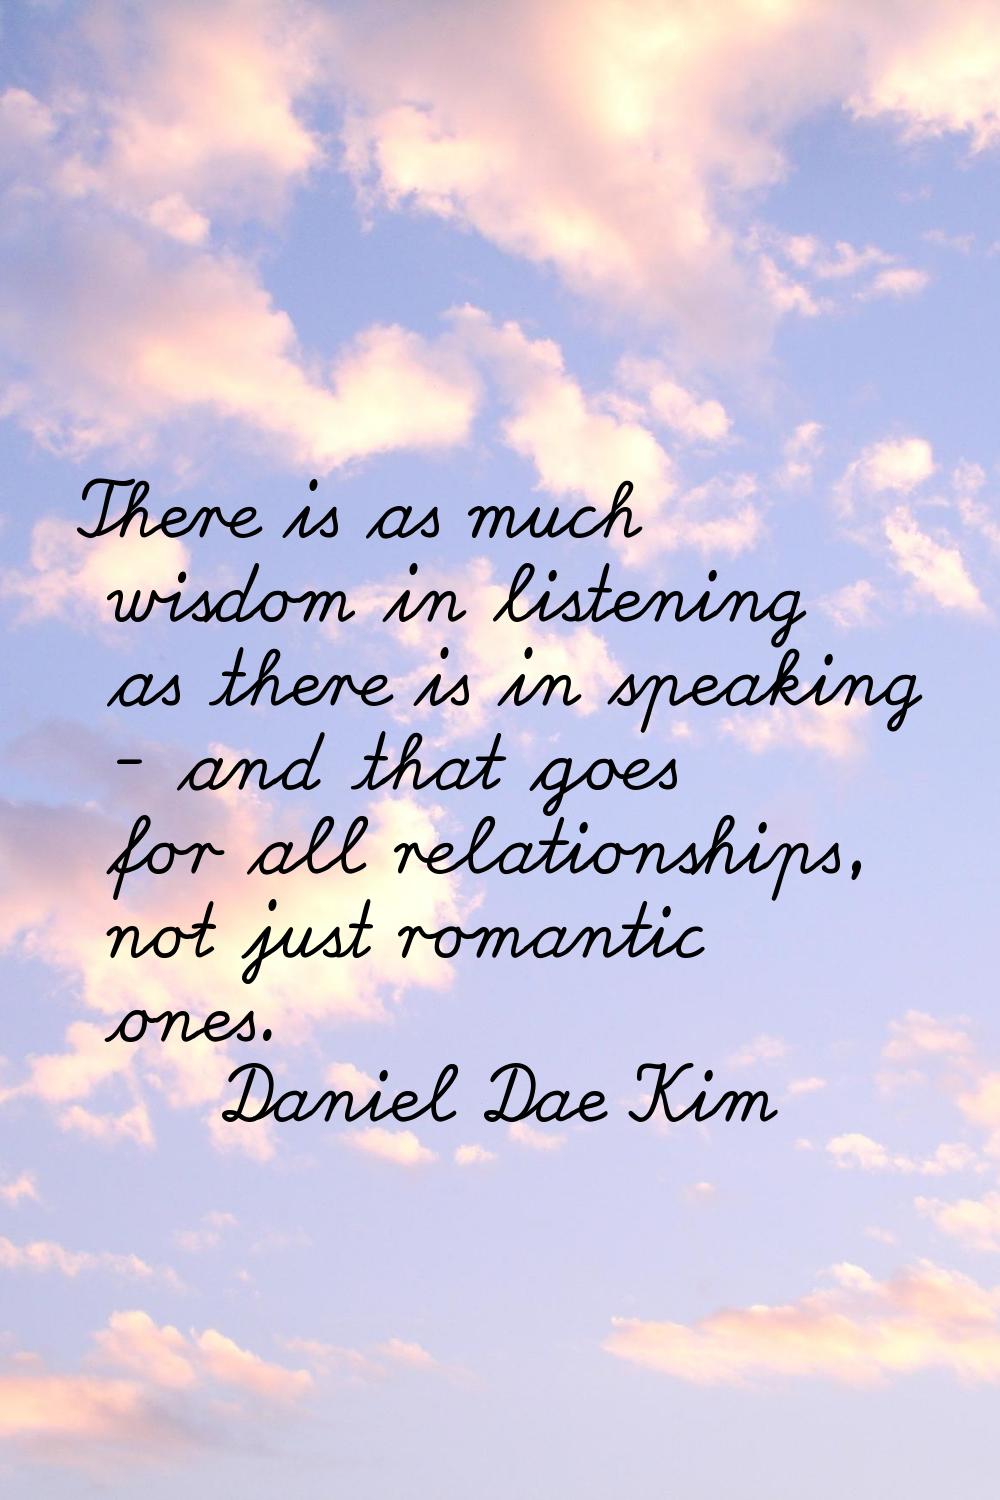 There is as much wisdom in listening as there is in speaking - and that goes for all relationships,